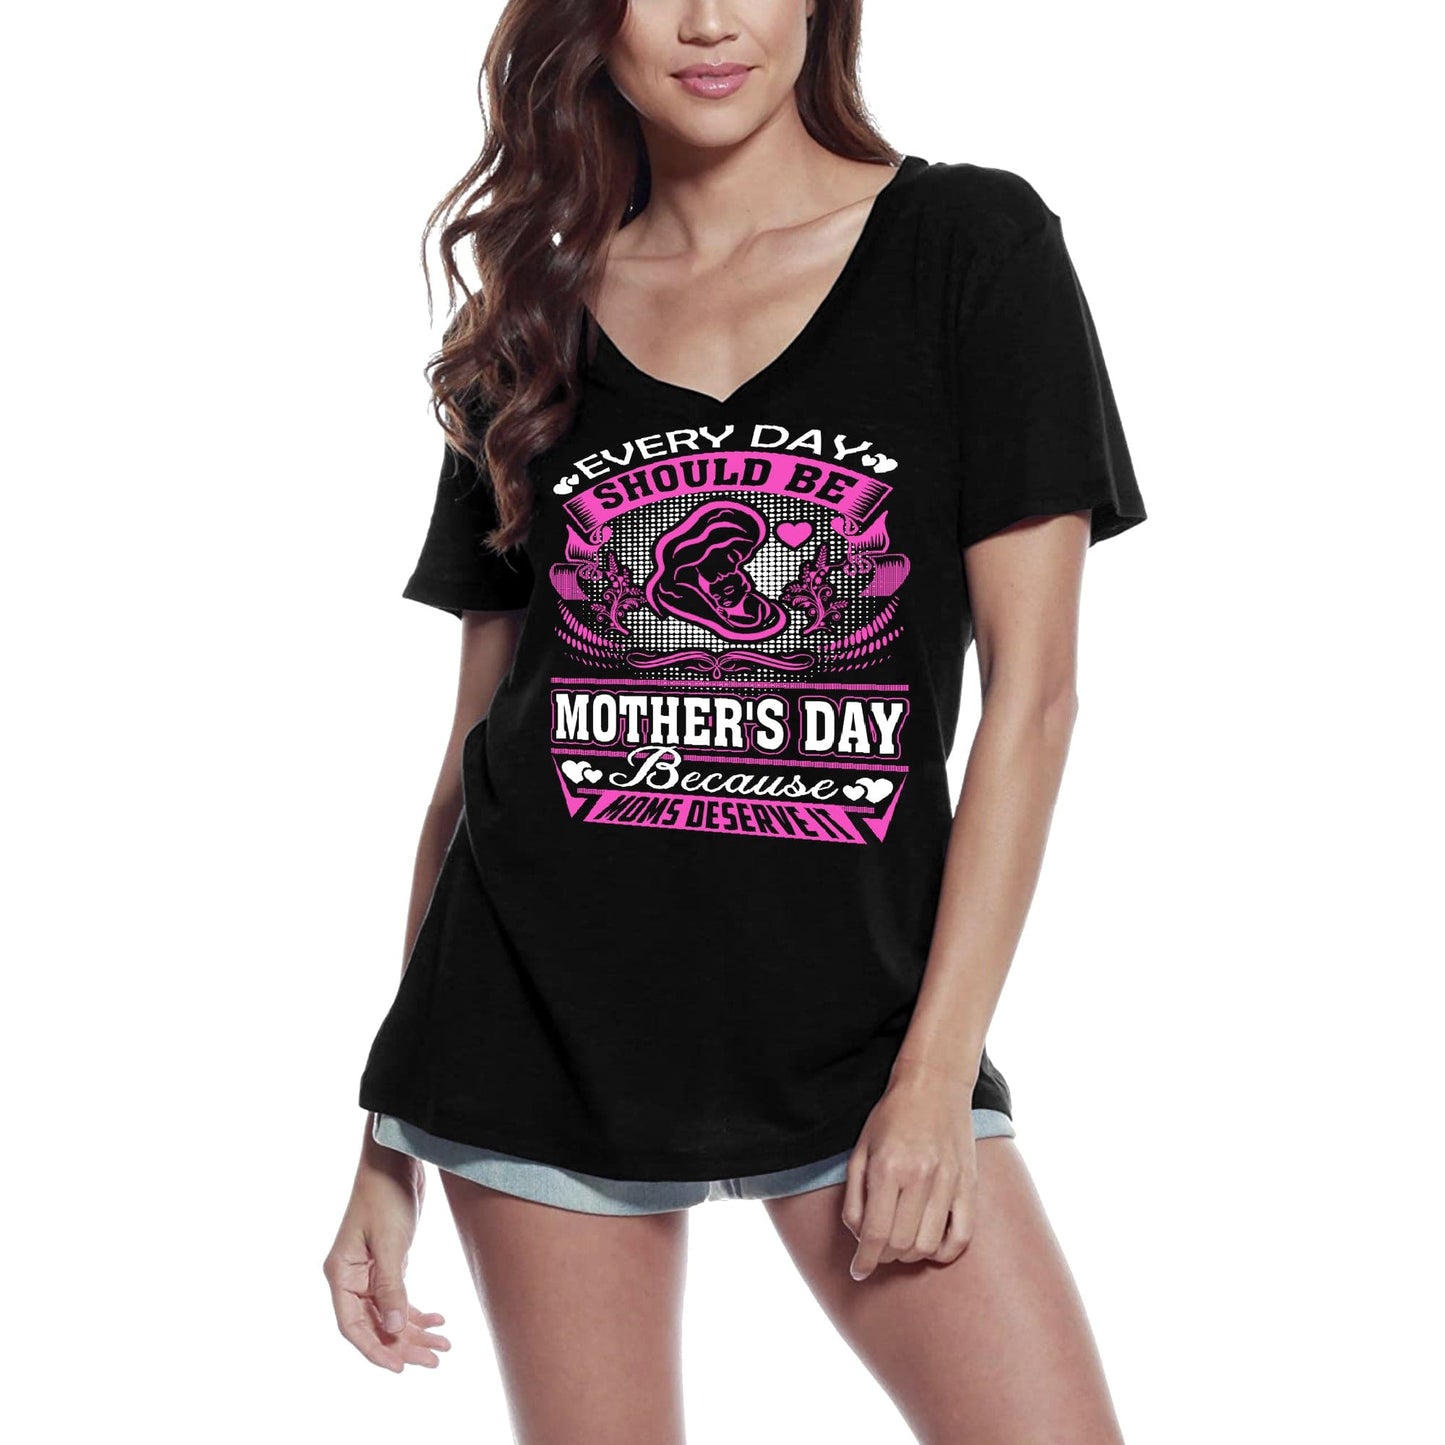 ULTRABASIC Women's T-Shirt Every Day Should be Mother's Day - Short Sleeve Tee Shirt Tops